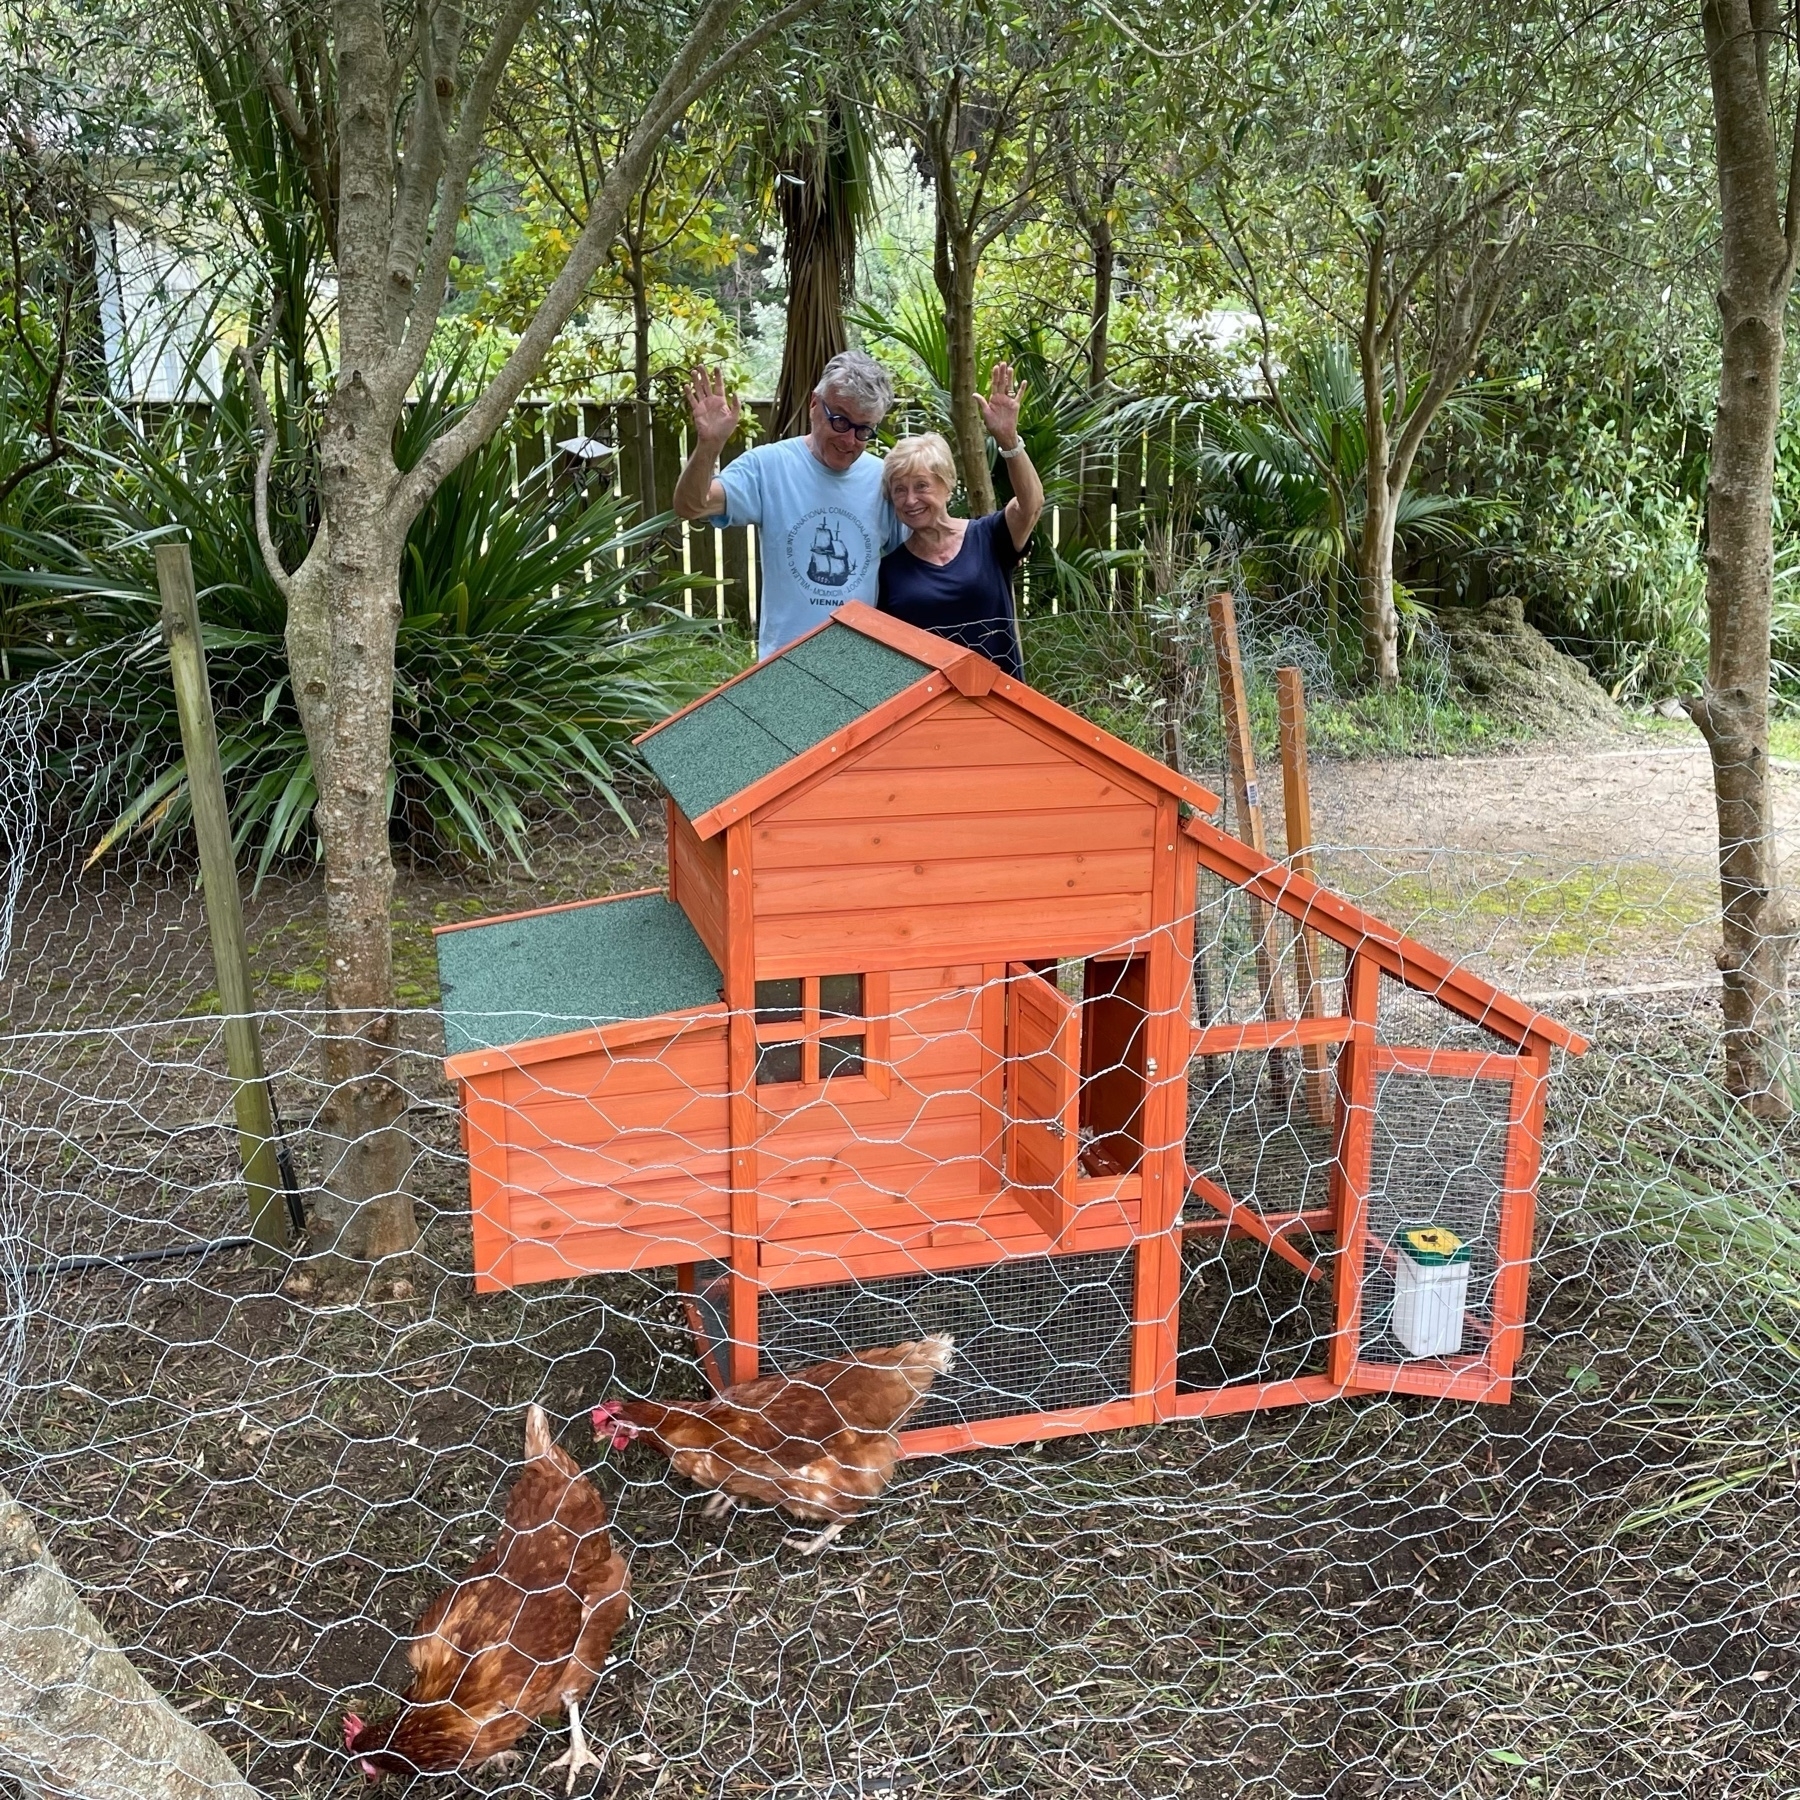 Chicken coop with two people waving. Two chickens in the foreground.